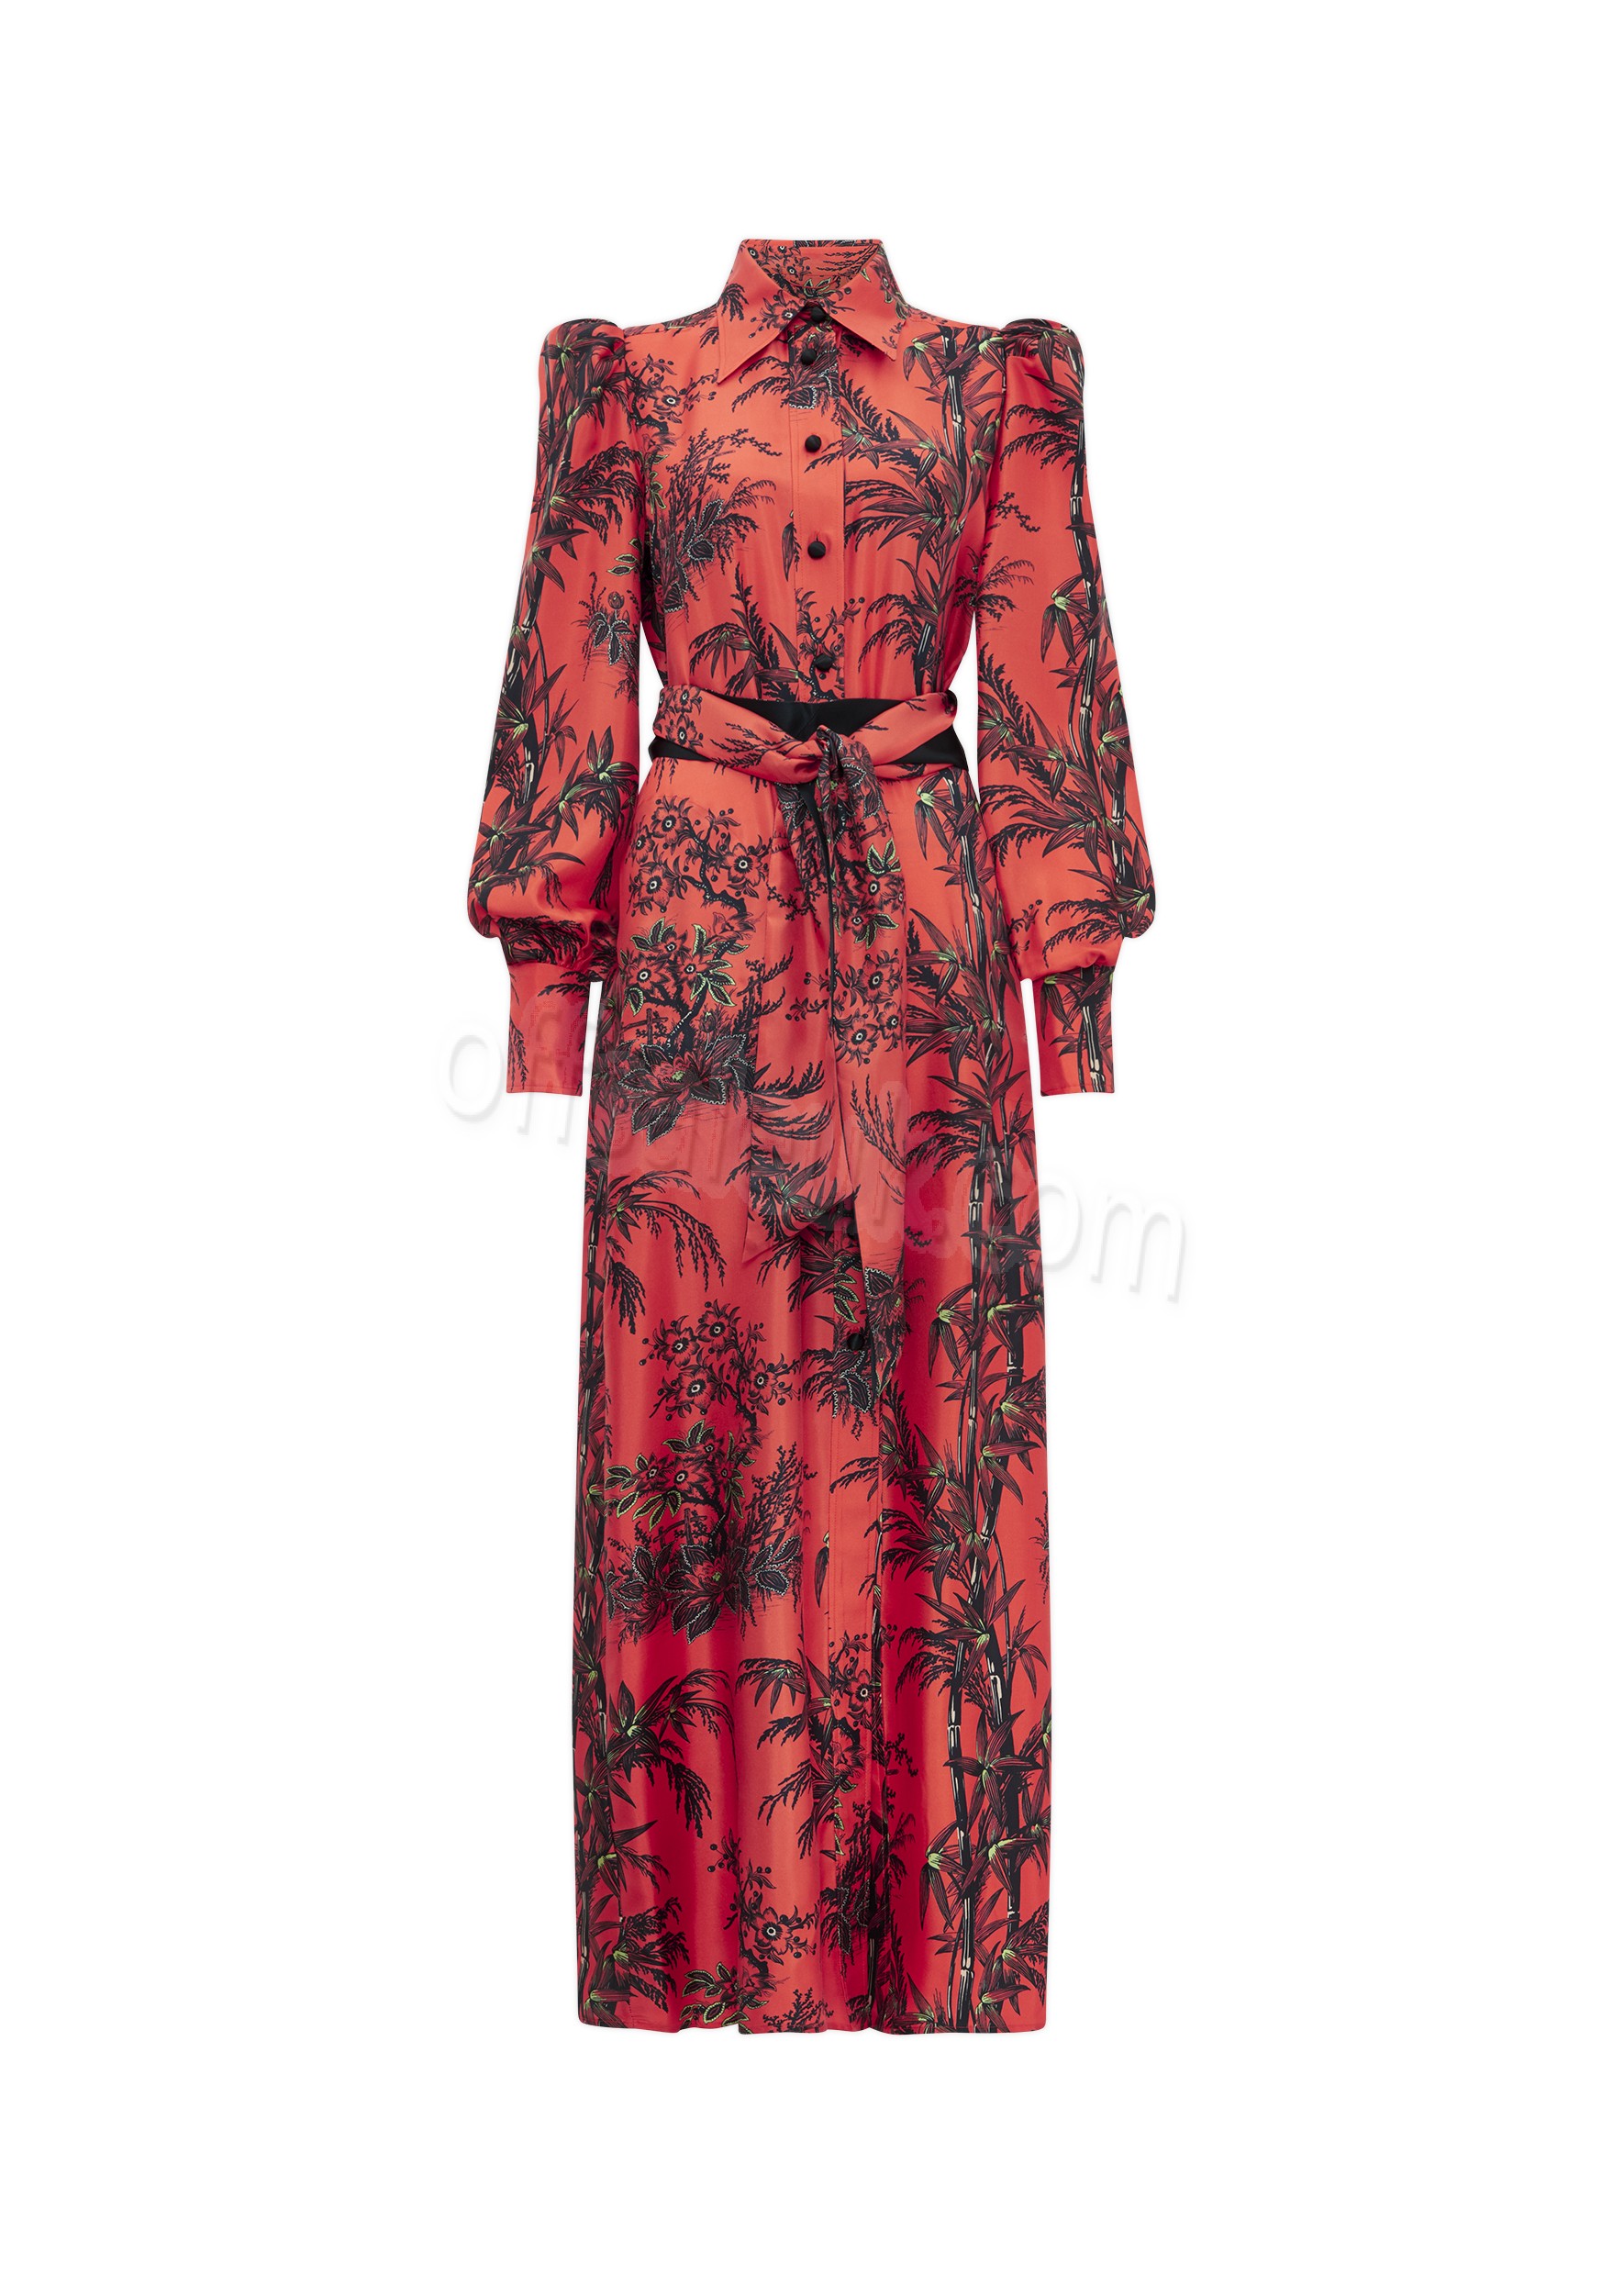 Discount Chinoiserie Silk Mood For Love Dress - Discount Chinoiserie Silk Mood For Love Dress